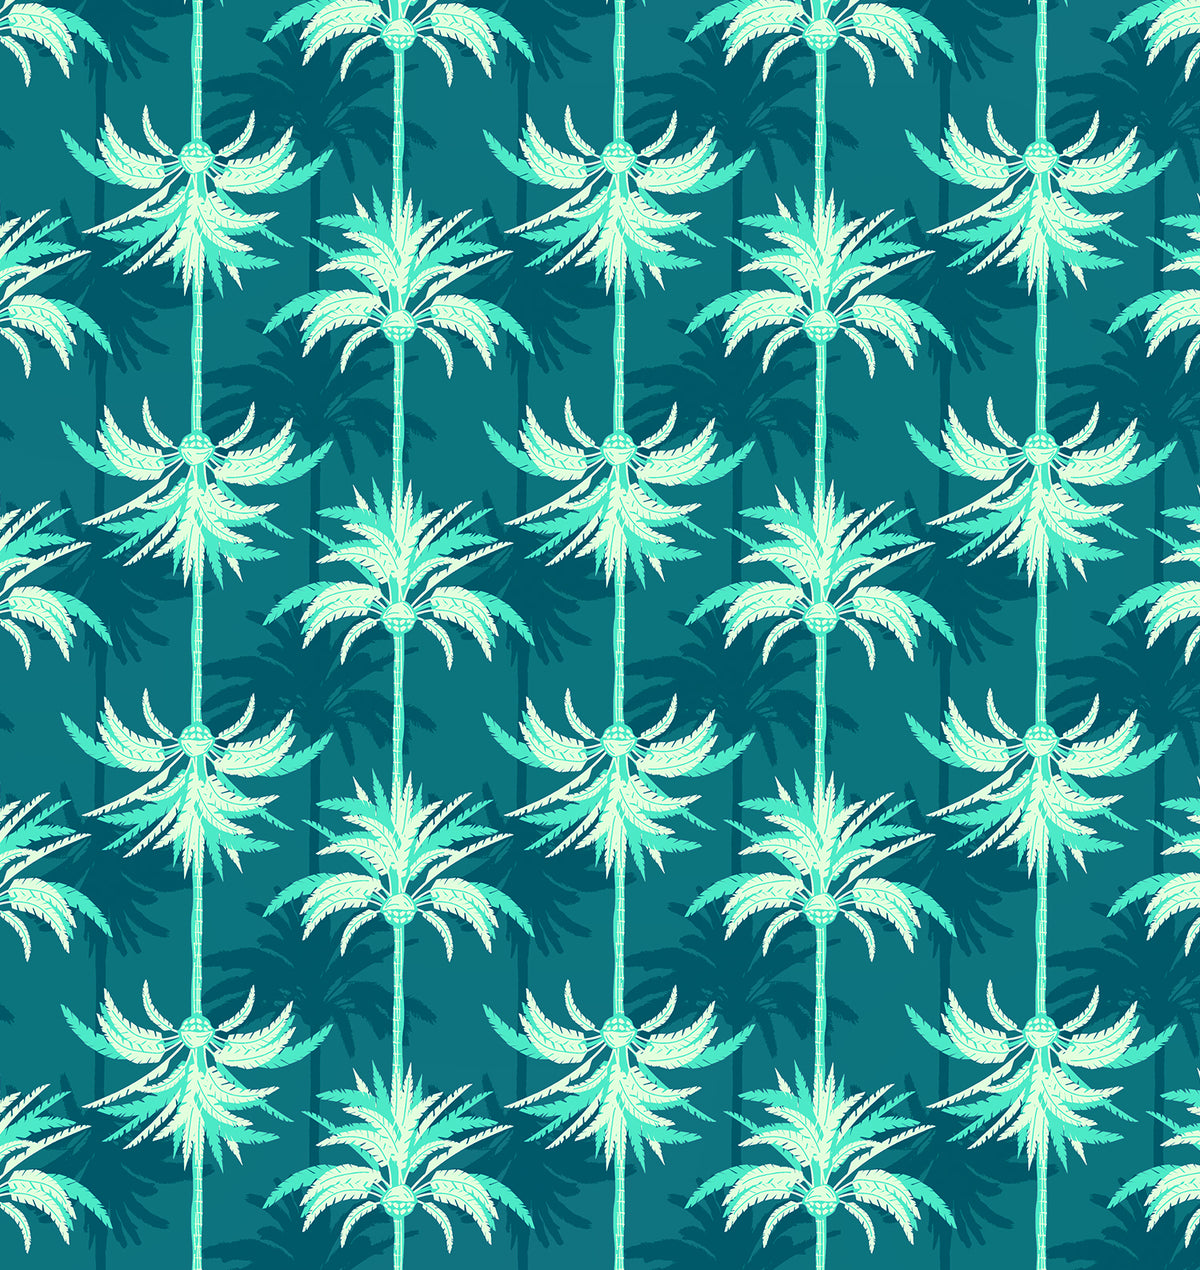 Sunsets Palm Beach two-tone graphic print featuring white-and-teal palm tree stripes on an Avalon Teal background